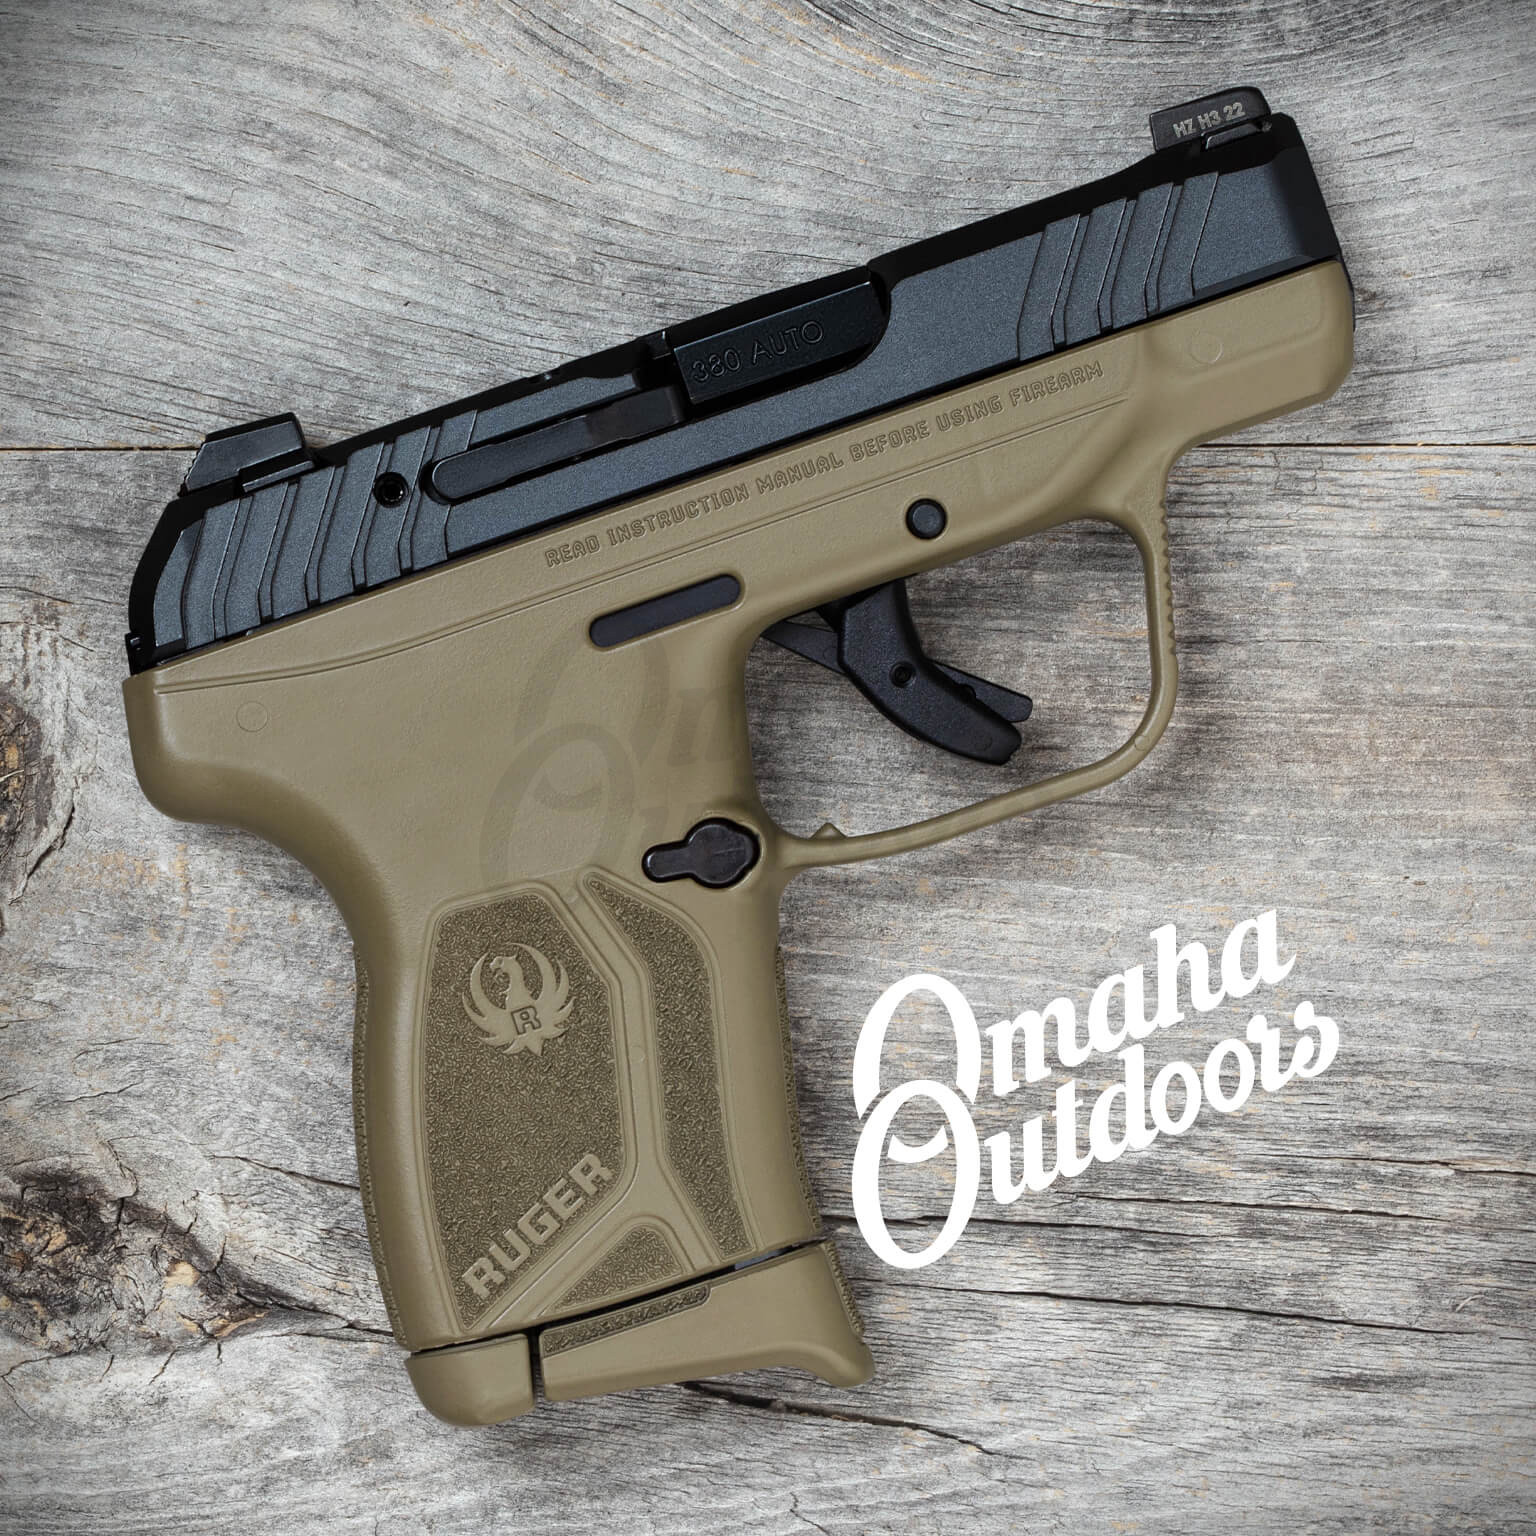 Review: Ruger LCP MAX